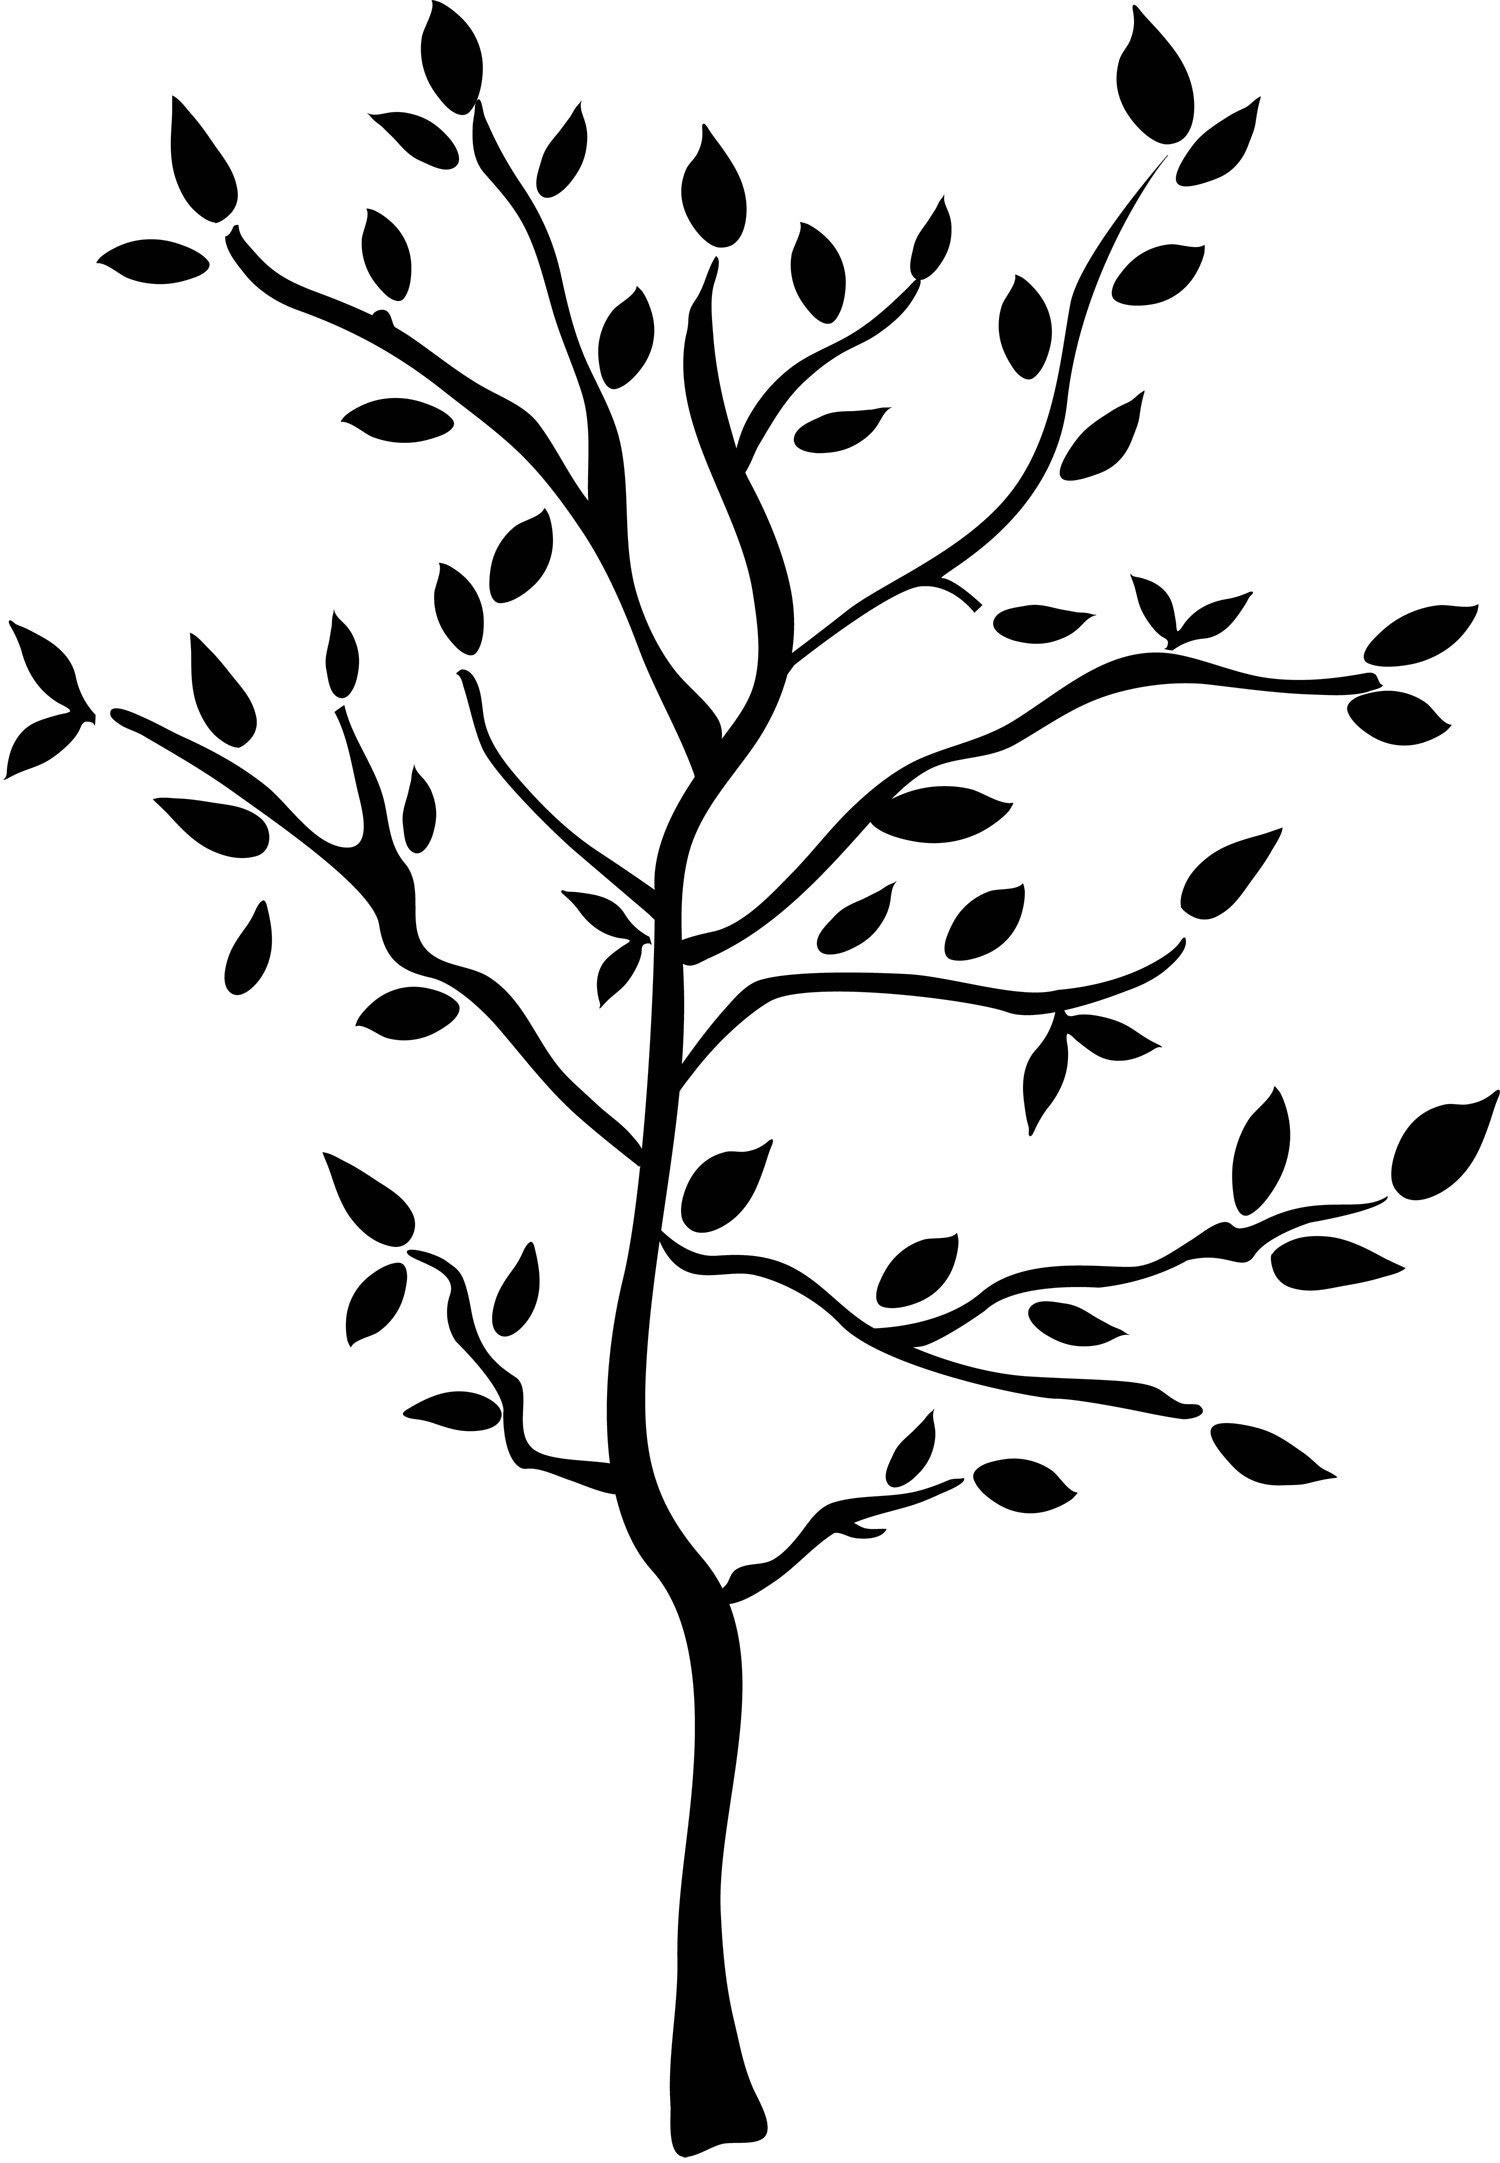 Tree Branch Wood - Free vector graphic on Pixabay - Pixabay - Clip Art ...